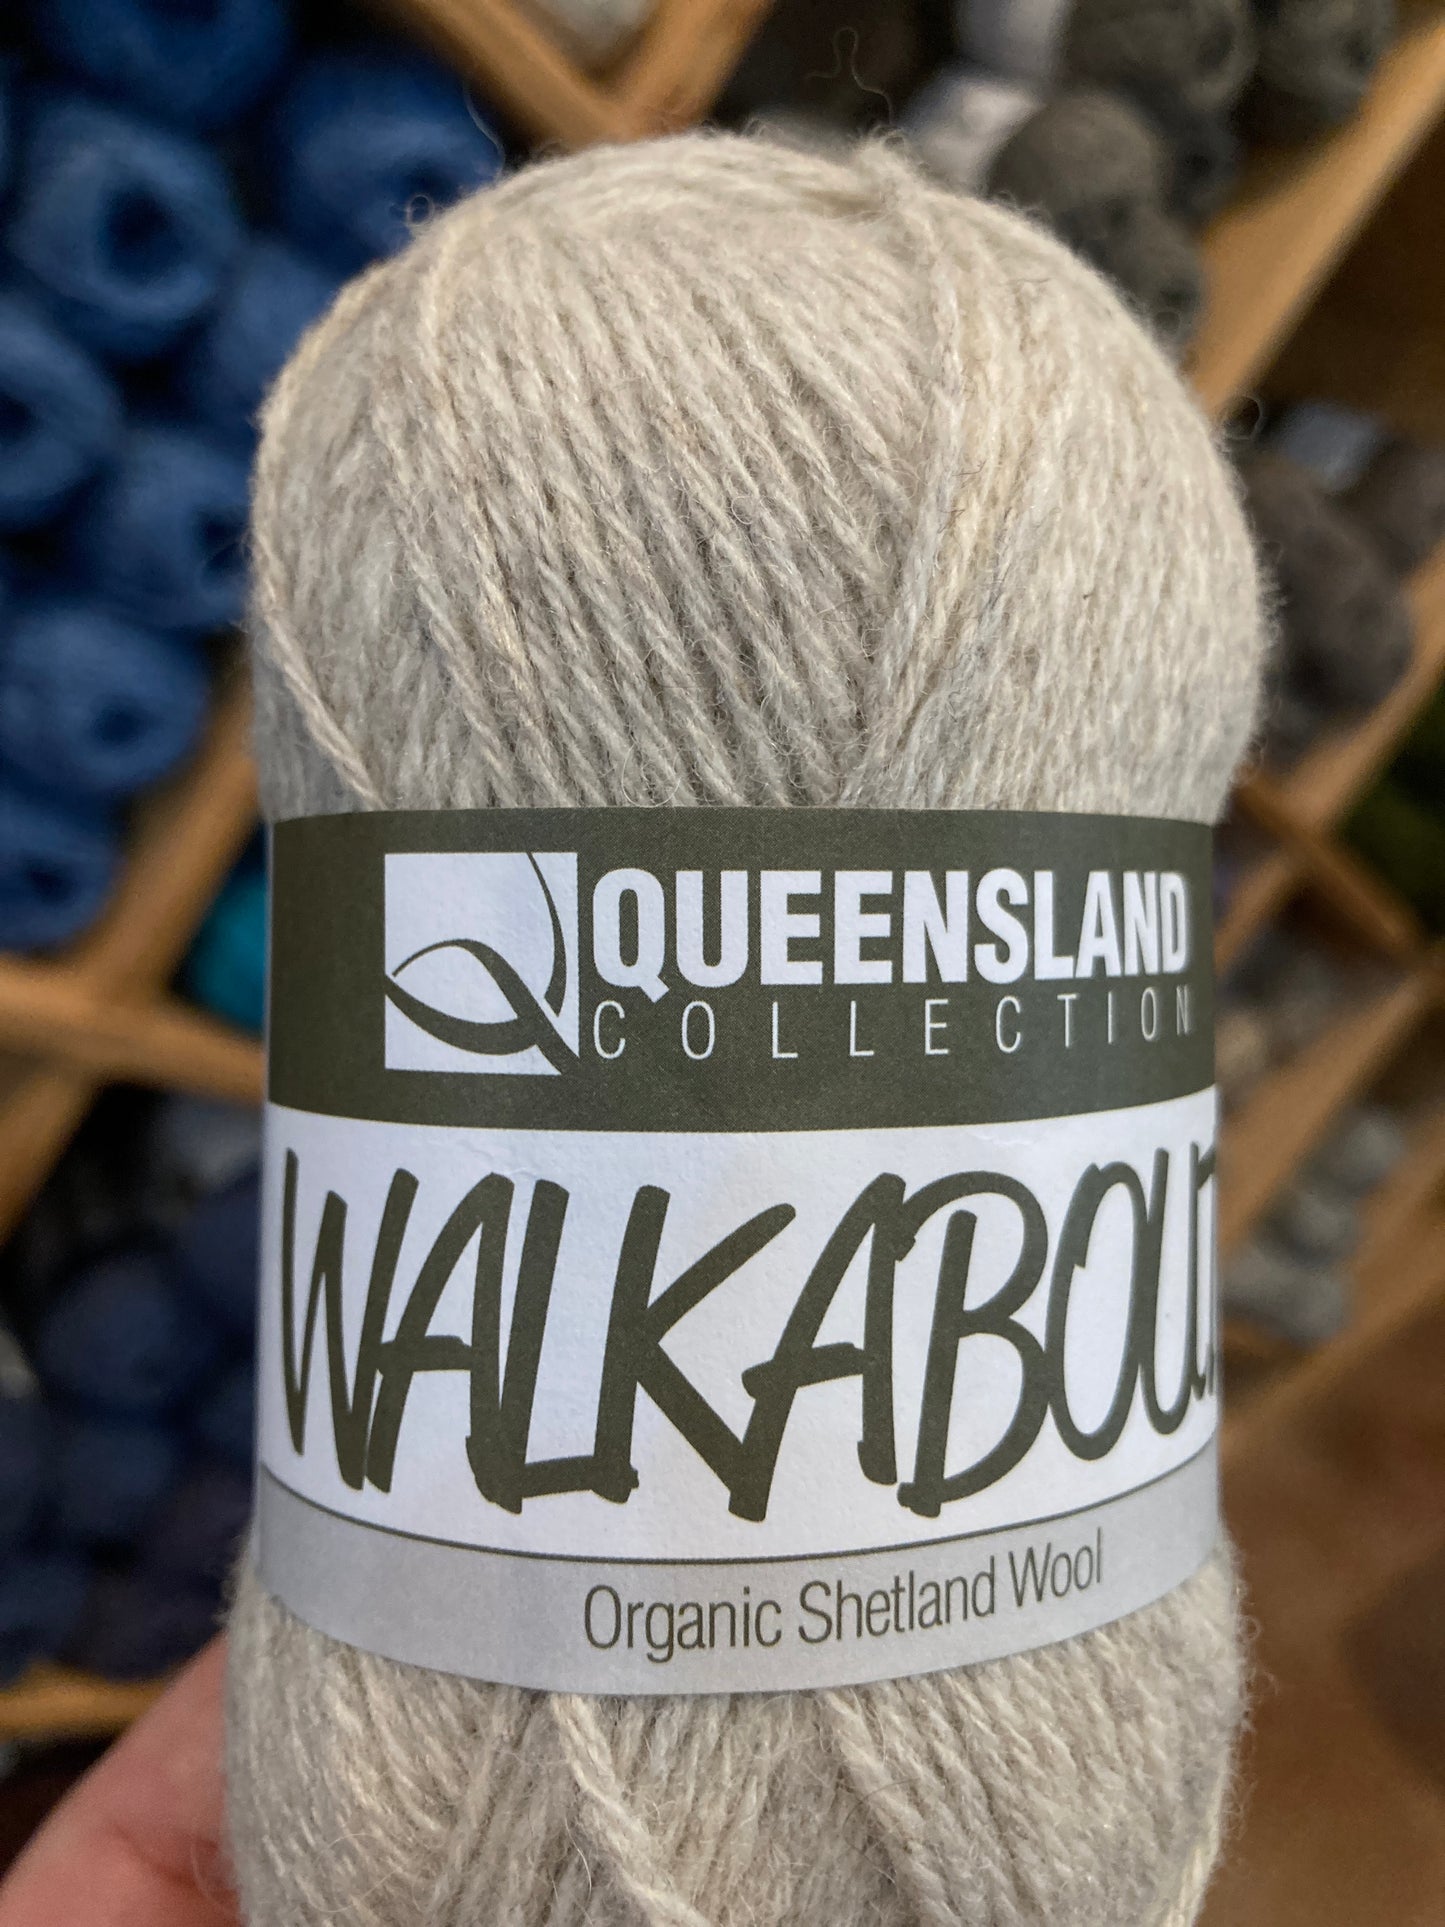 Queensland Collection Walkabout